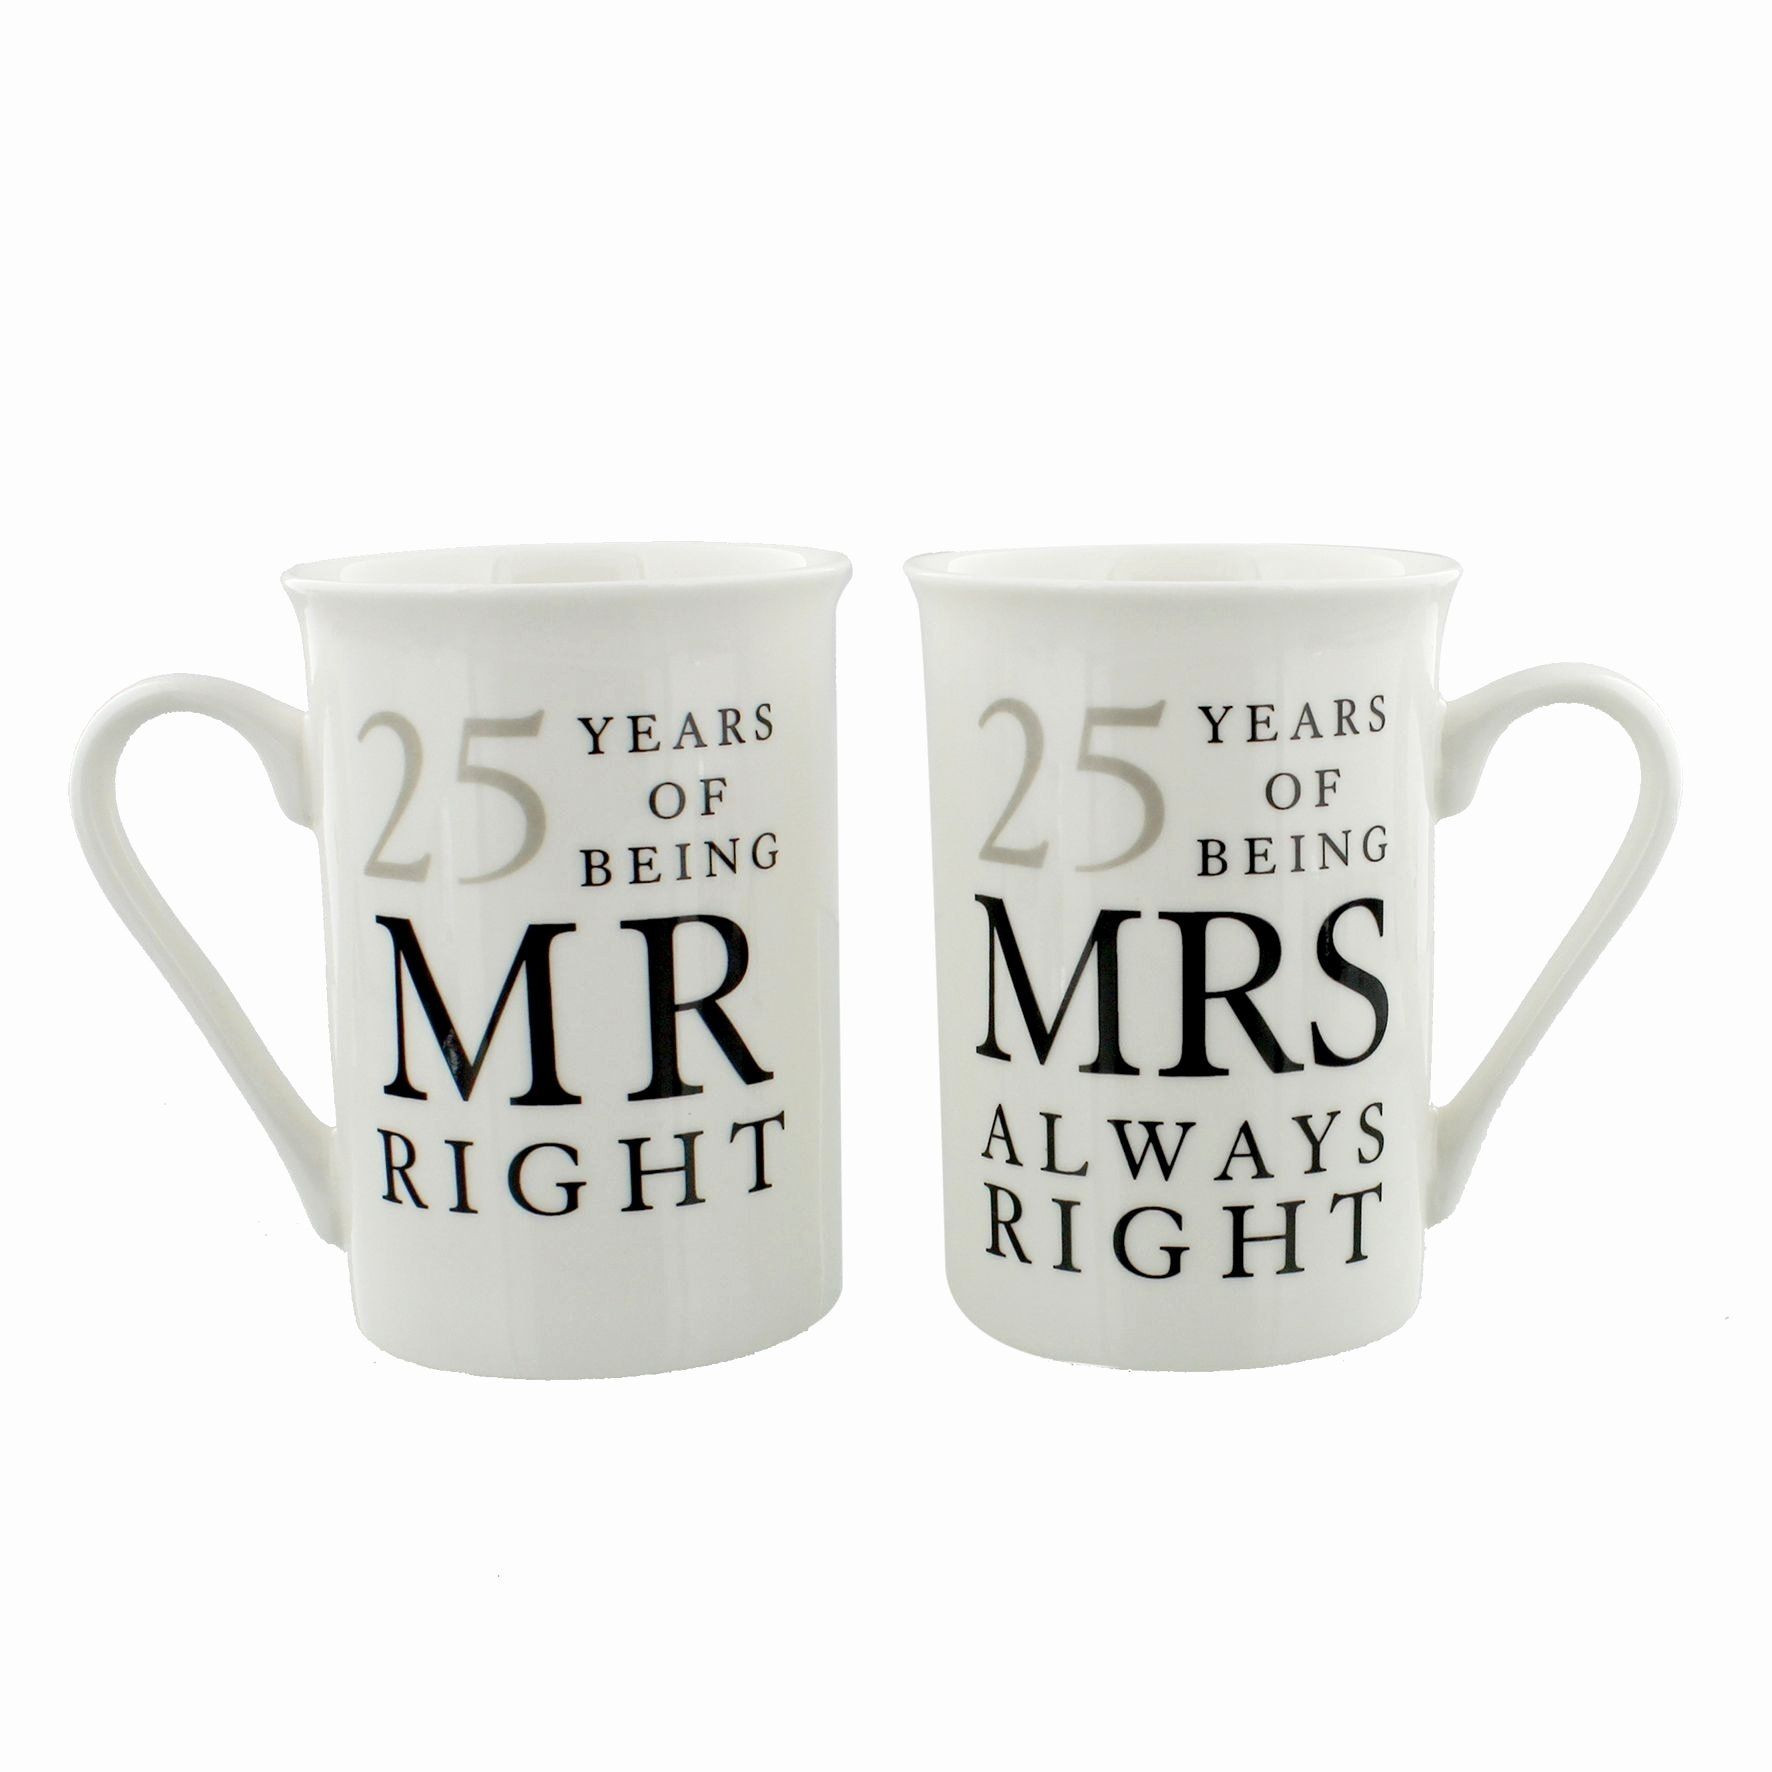 25Th Wedding Anniversary Gift Ideas For Couples
 10 Stylish Silver Wedding Anniversary Gift Ideas